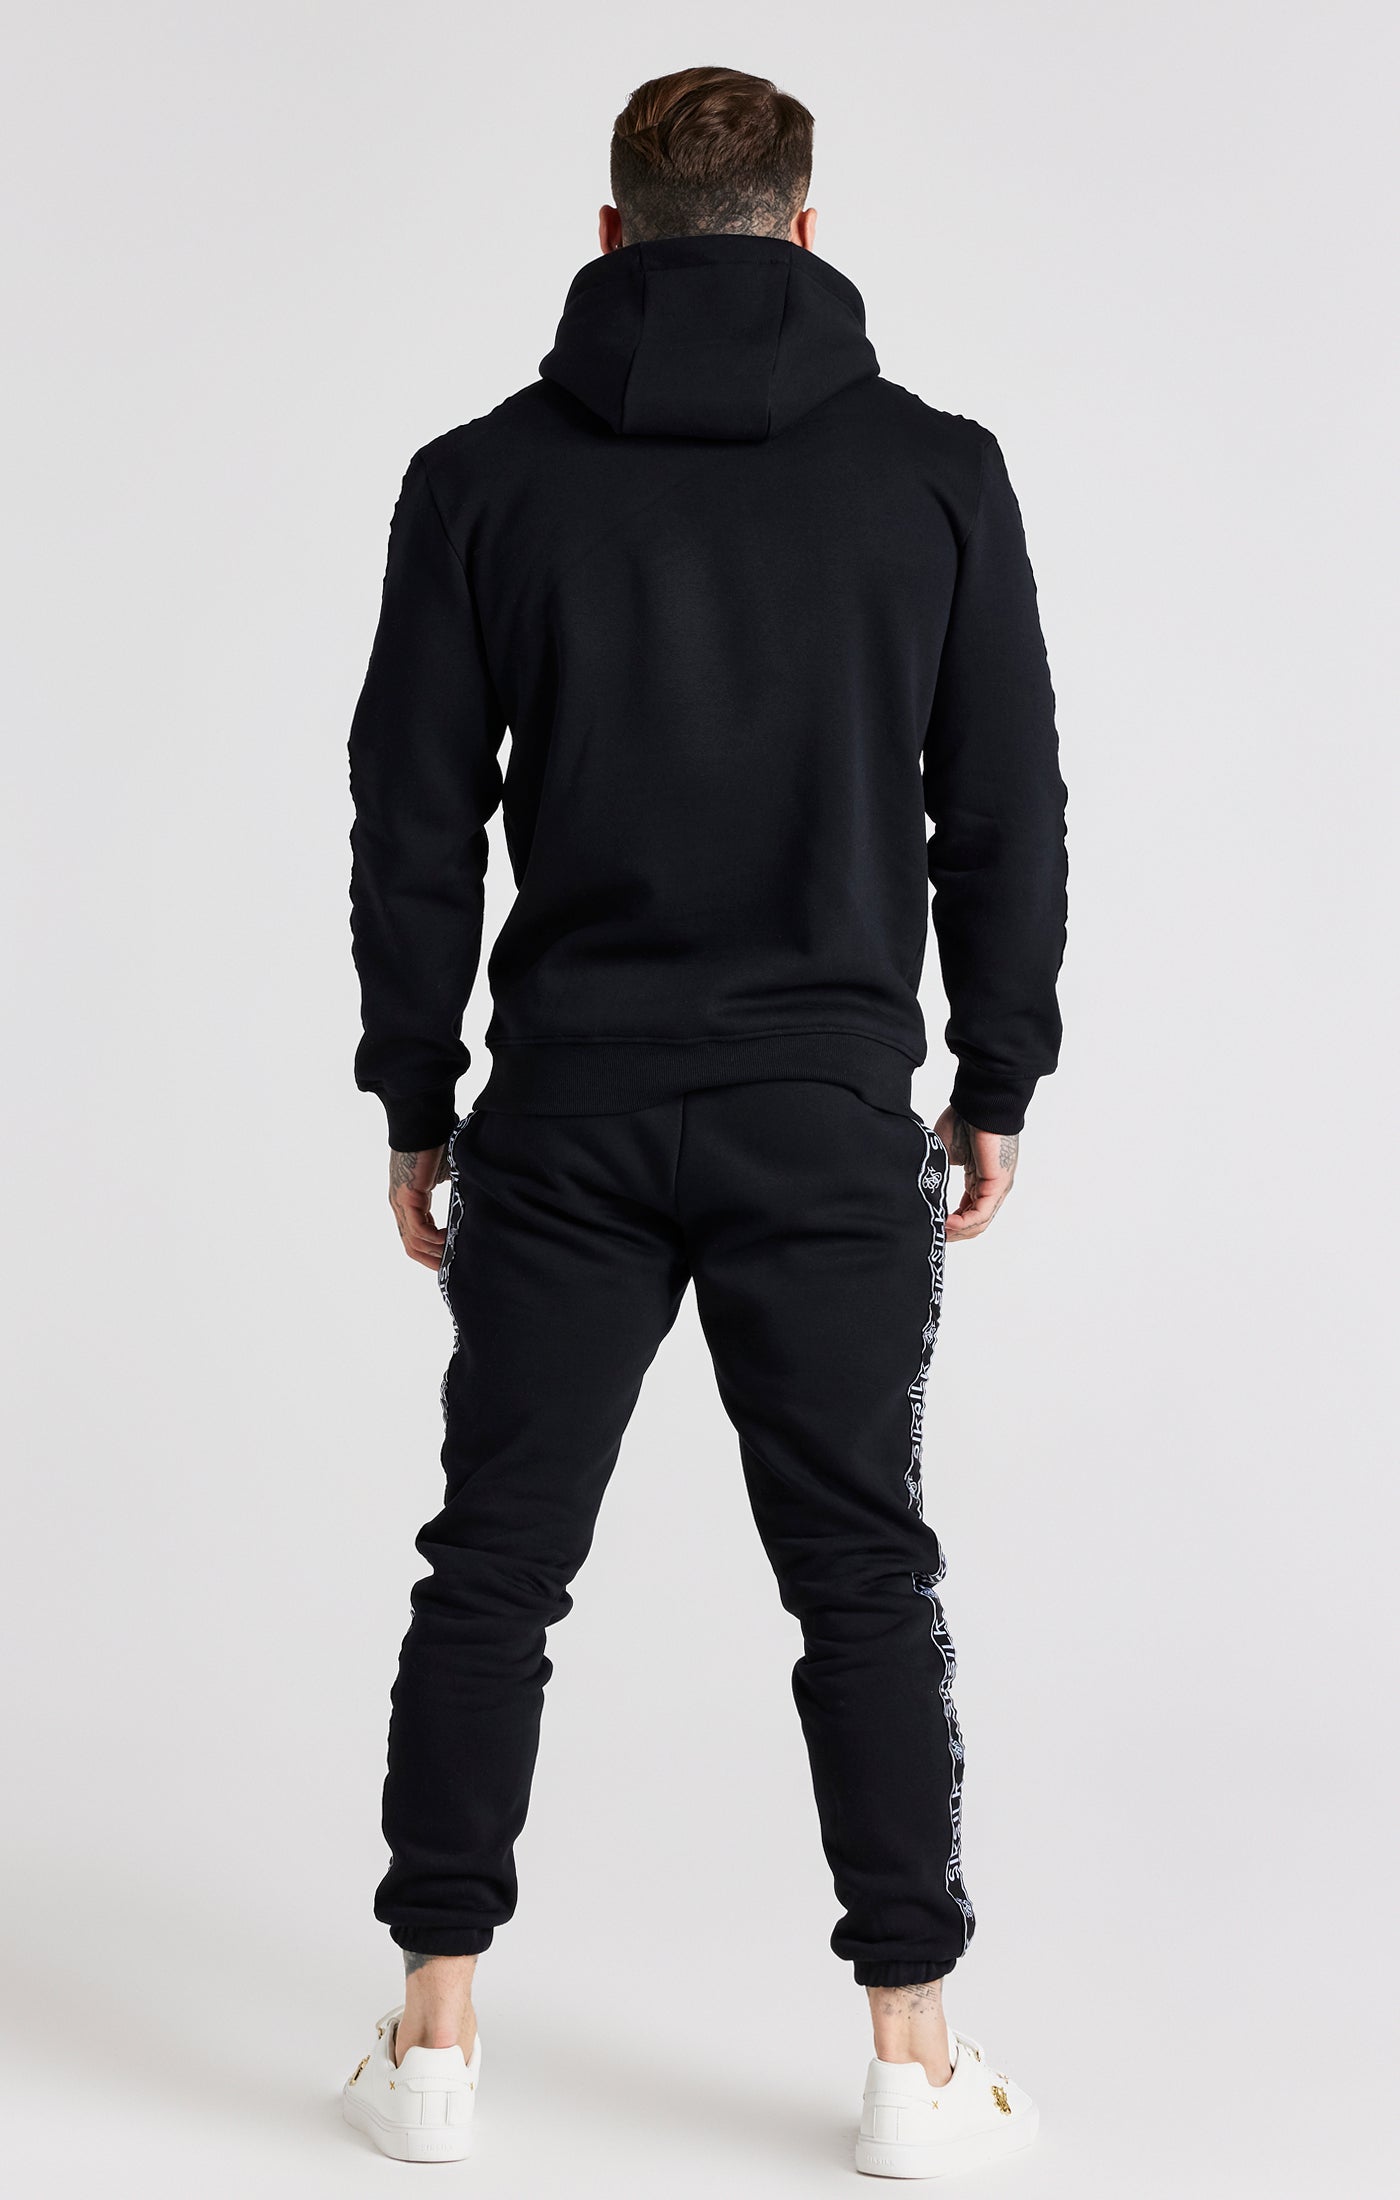 Load image into Gallery viewer, Black Taped Hoodie And Pant Tracksuit Set (6)